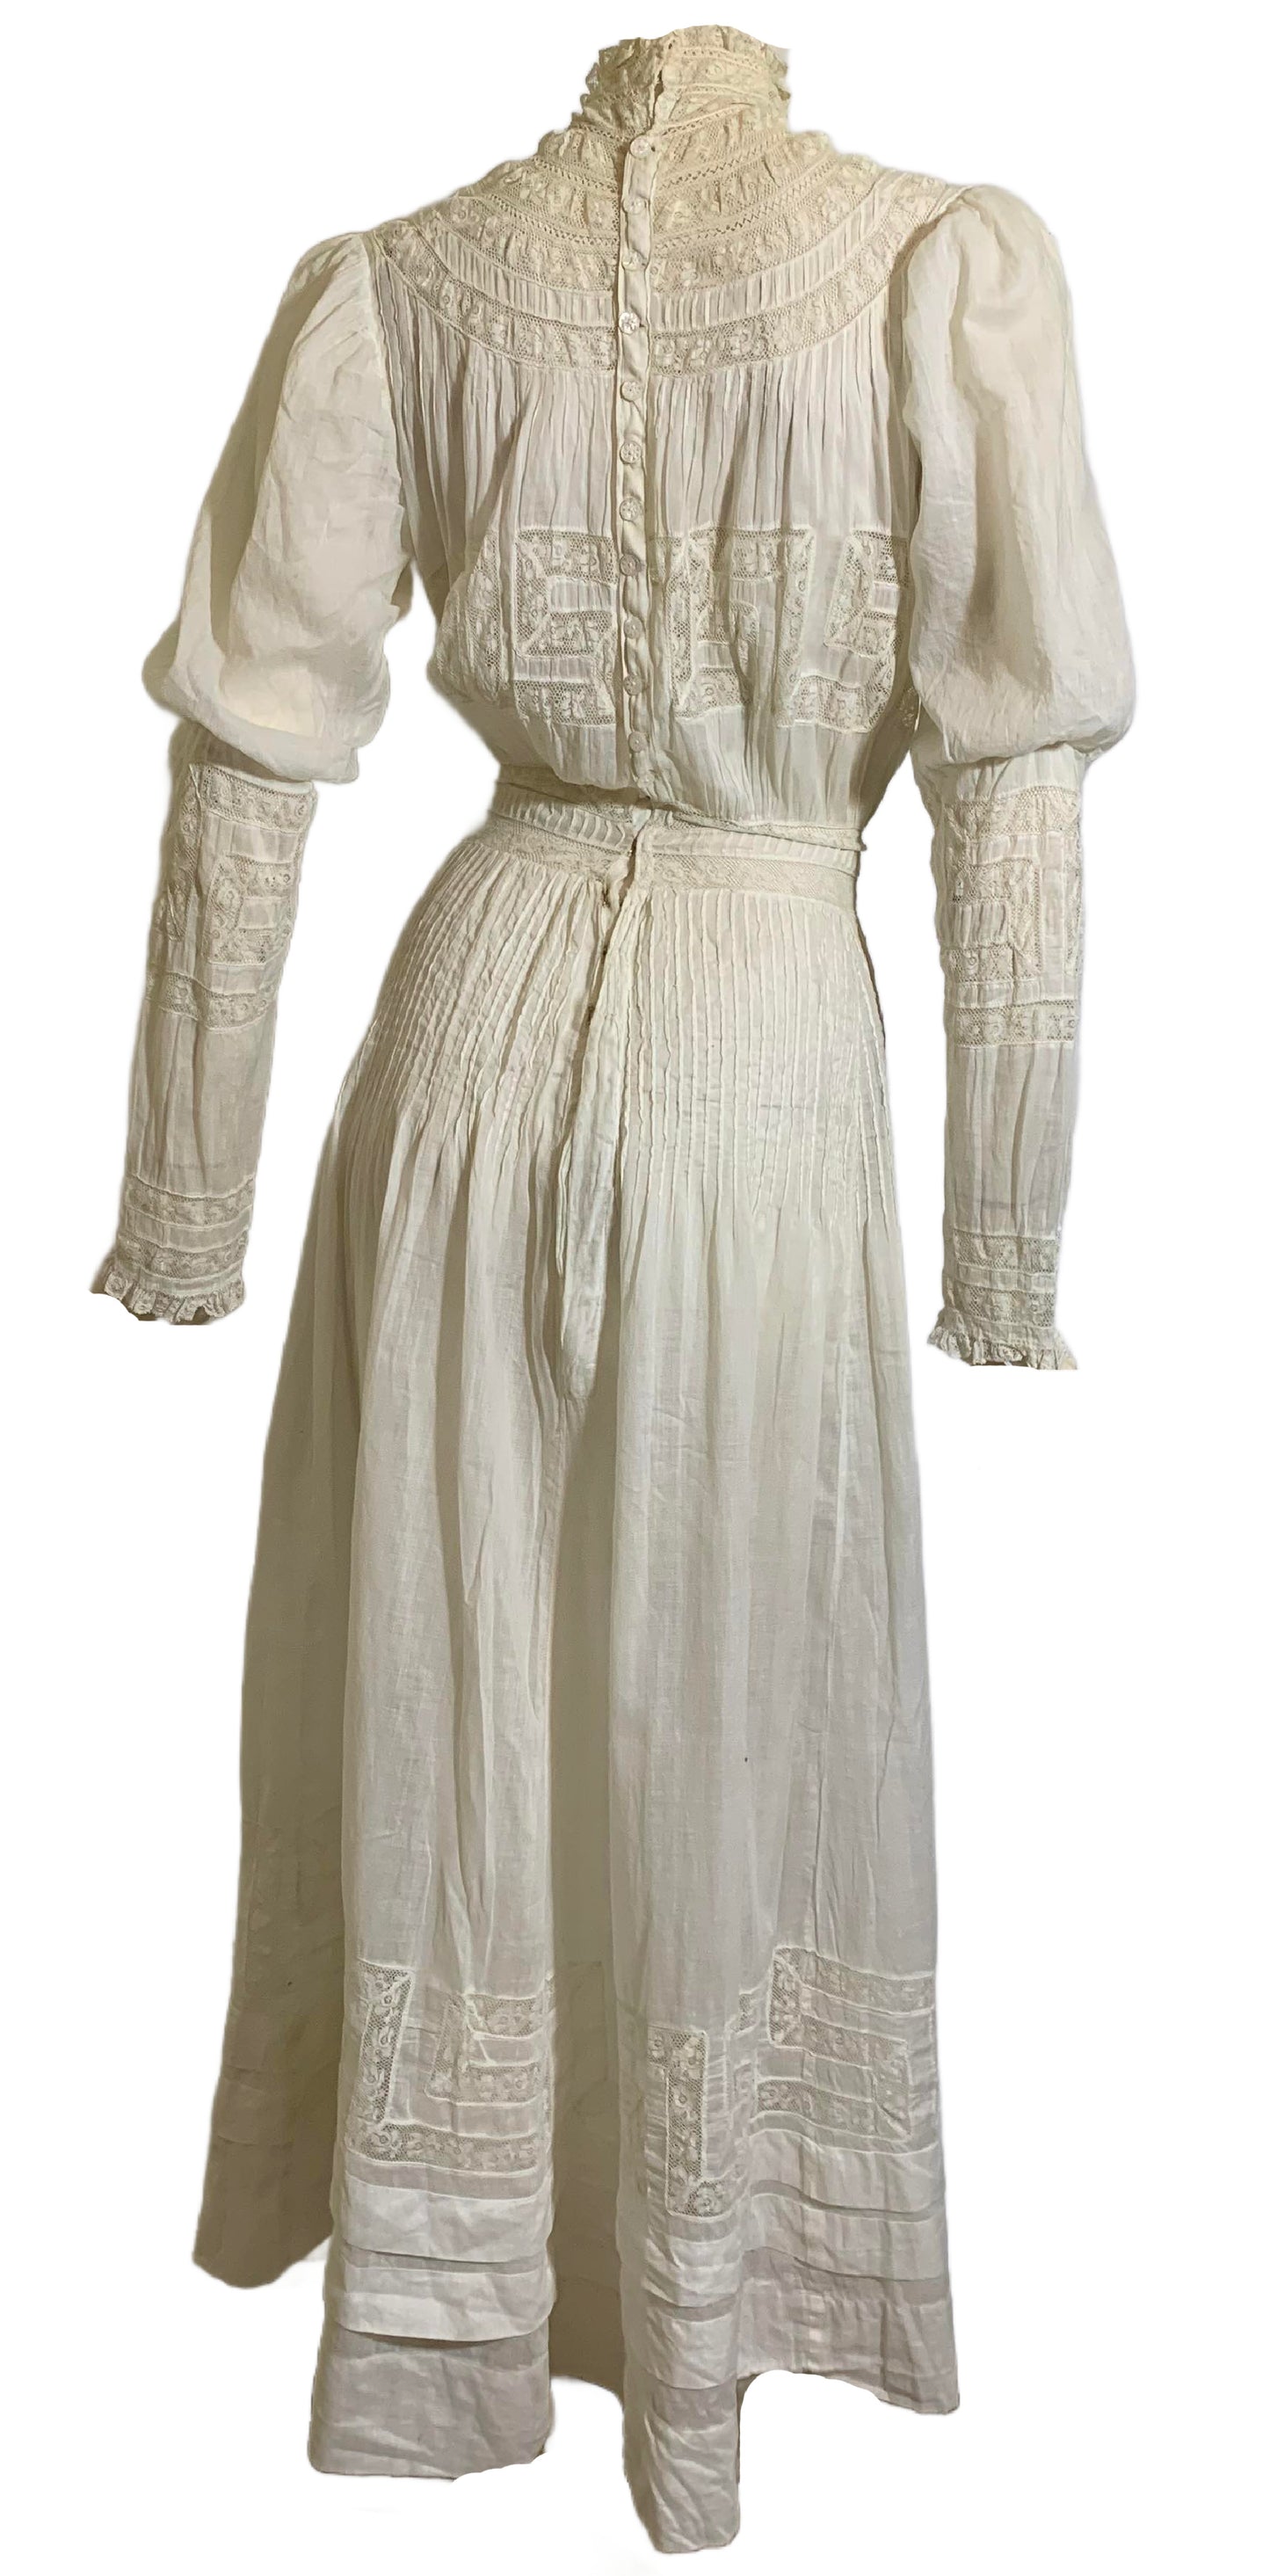 Sweet White Lawn Cotton Pin Tucked Lace Trimmed Garden Party Dress circa 1890s